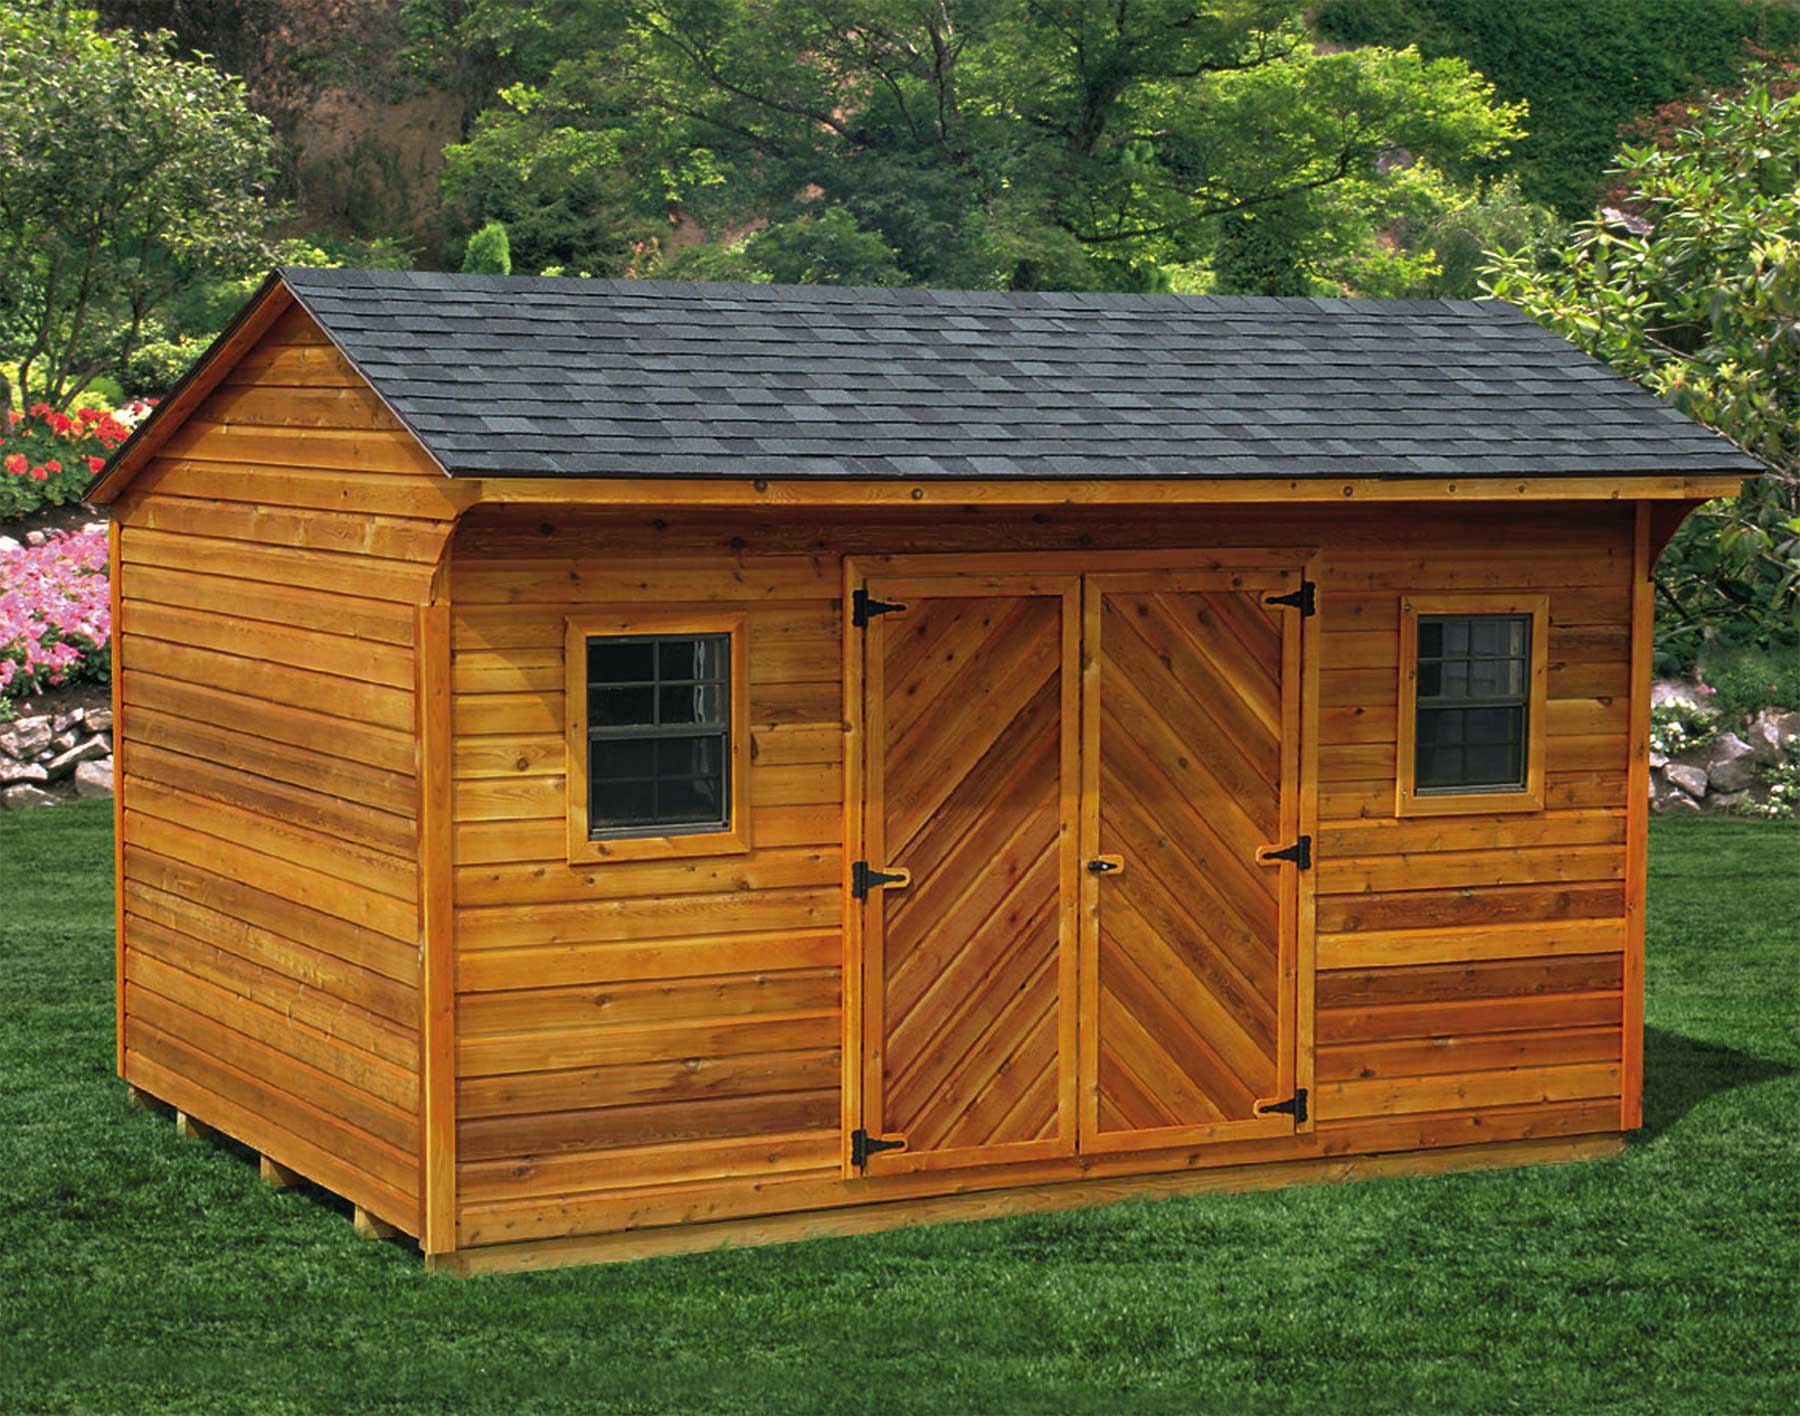 Simple Storage Shed Designs For Your Backyard – Cool Shed Deisgn